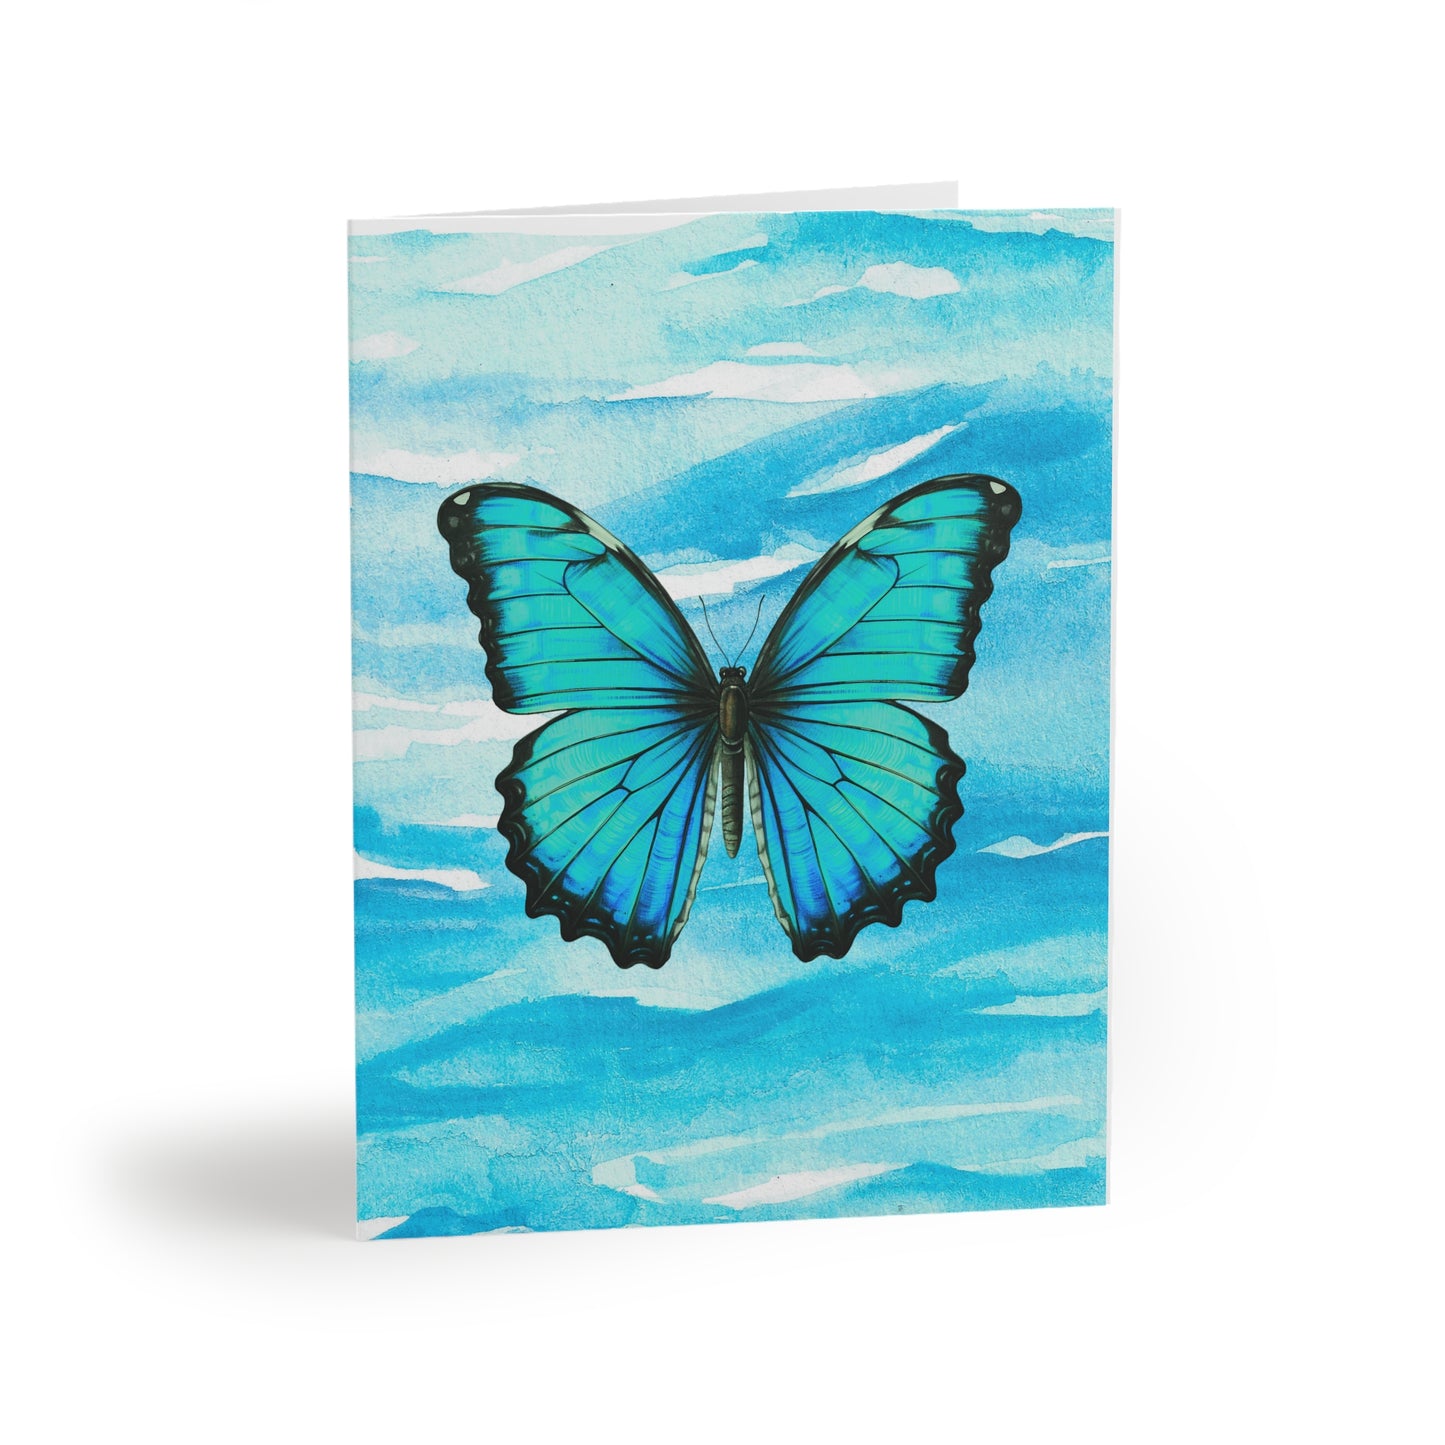 Butterfly Ocean Coastal Note Greeting Cards (8 pcs)